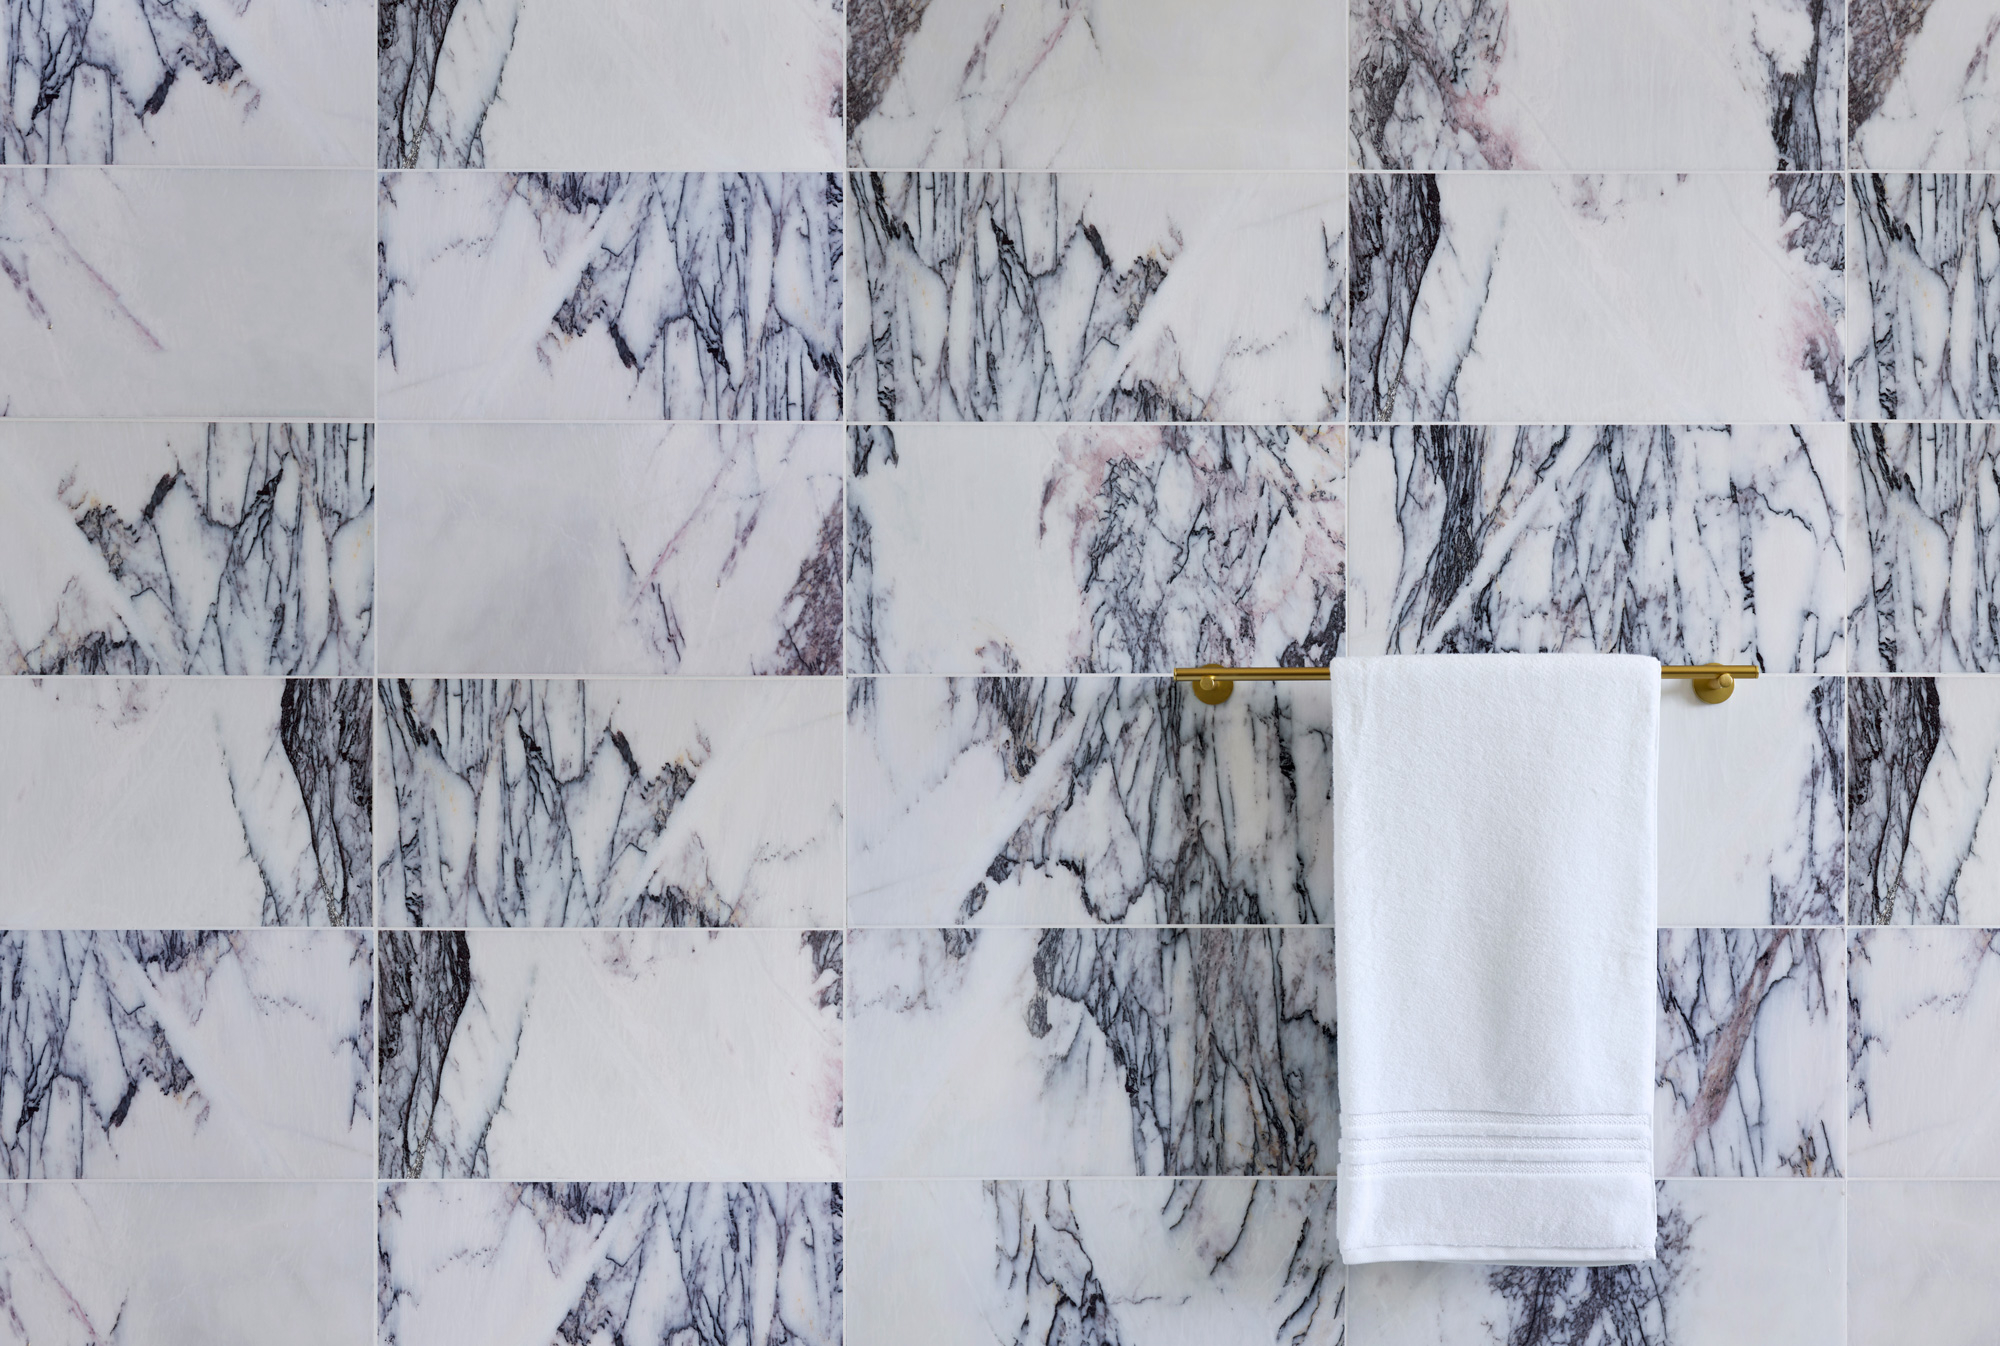 IRG Lilac Marble